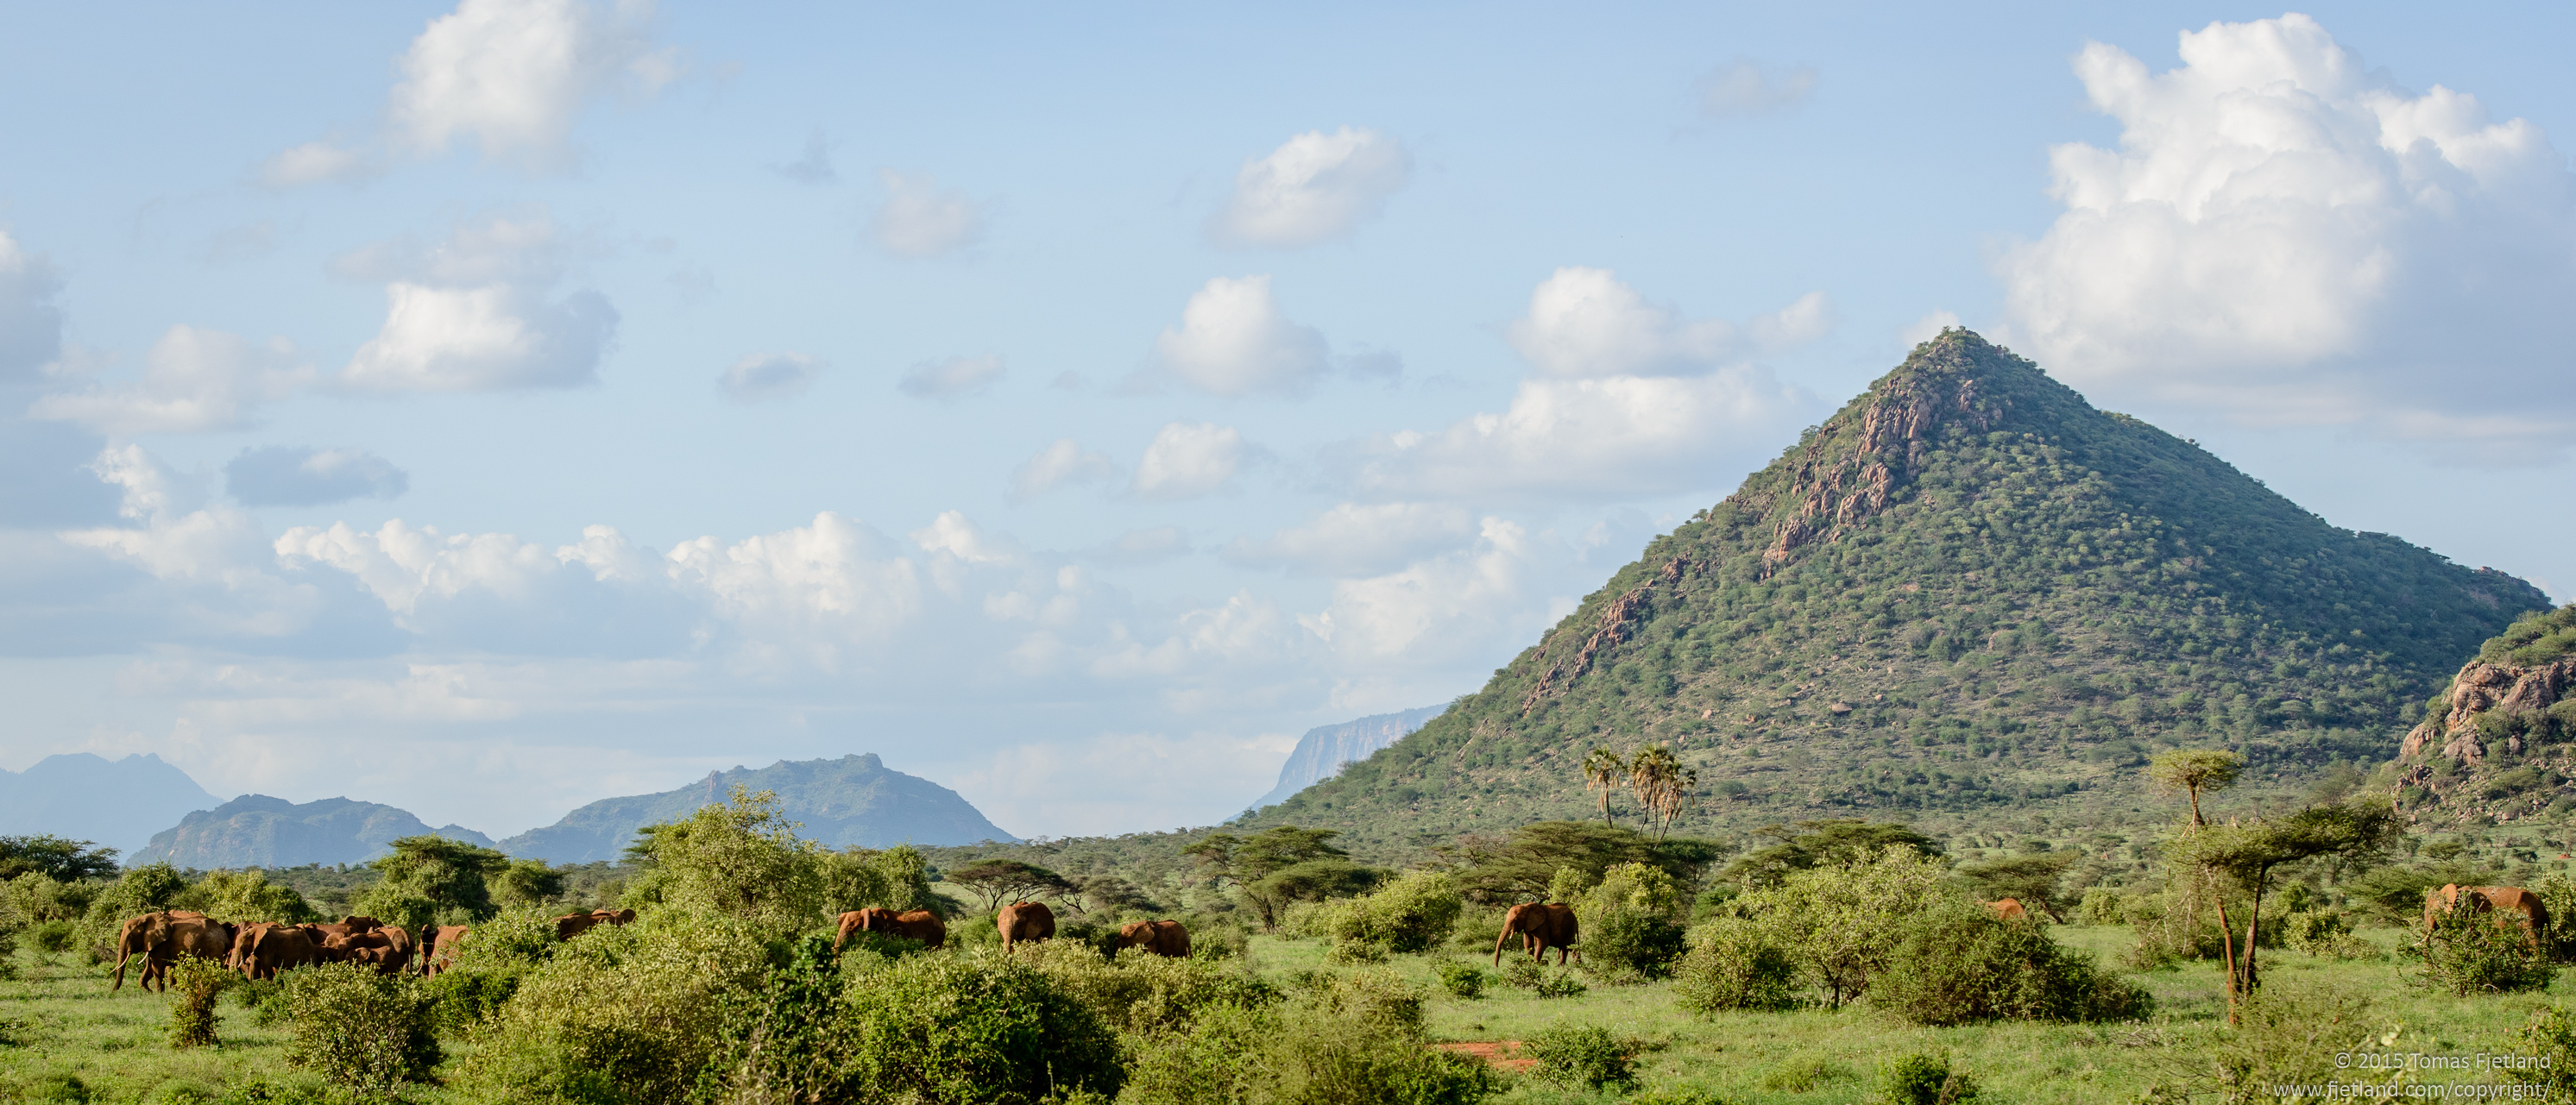 In November 2014, I saw far more elephants in Samburu than I had seen the previous years. They were so many they seemed to group in herds larger than the usual families